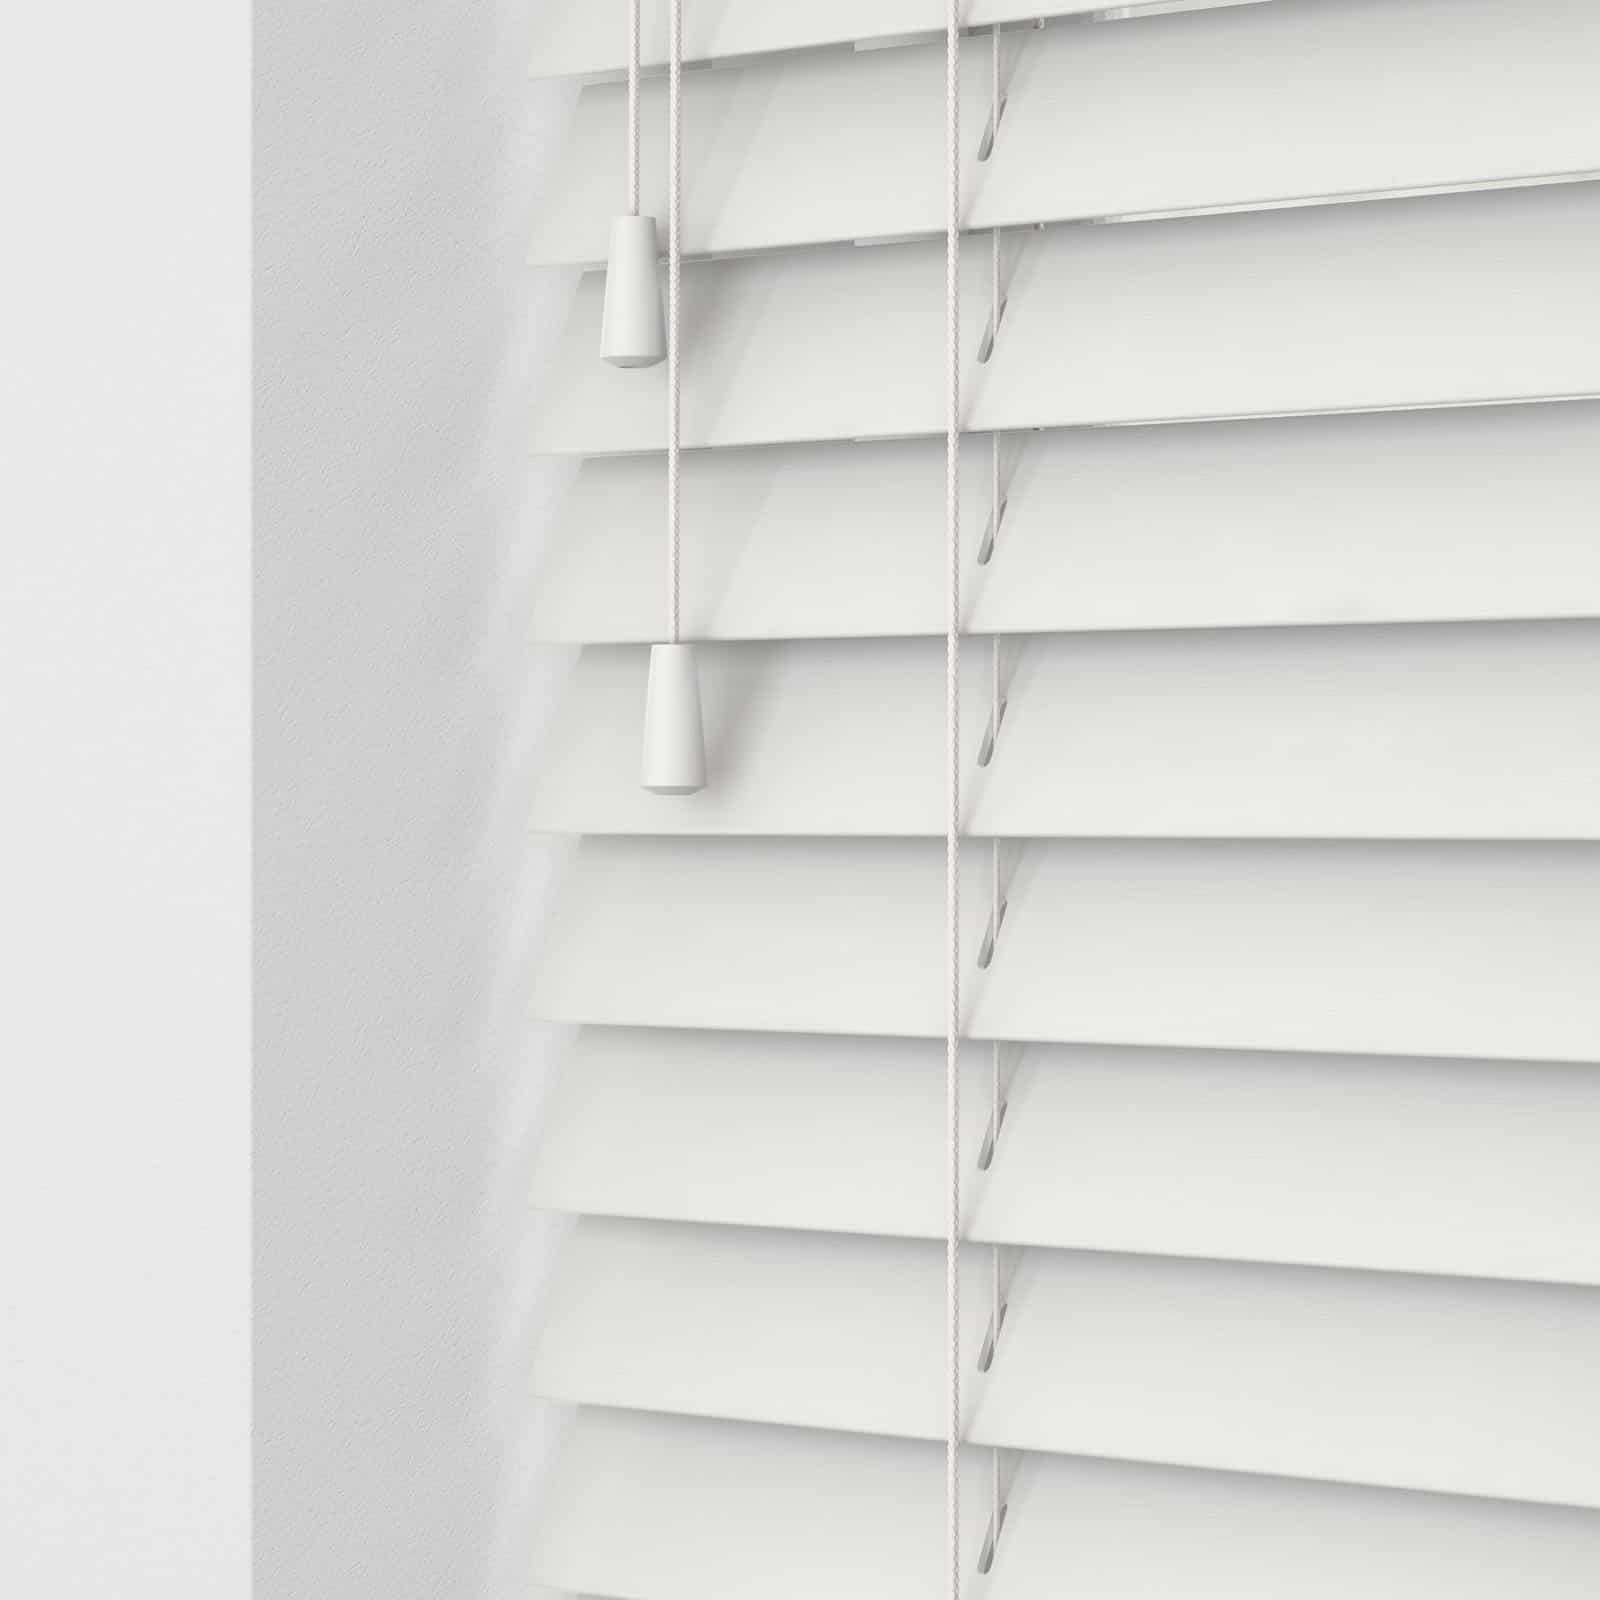 FAUX WOOD WOODEN VENETIAN BLINDS  MADE TO MEASURE   CHILD SAFE  WATERPROOF 